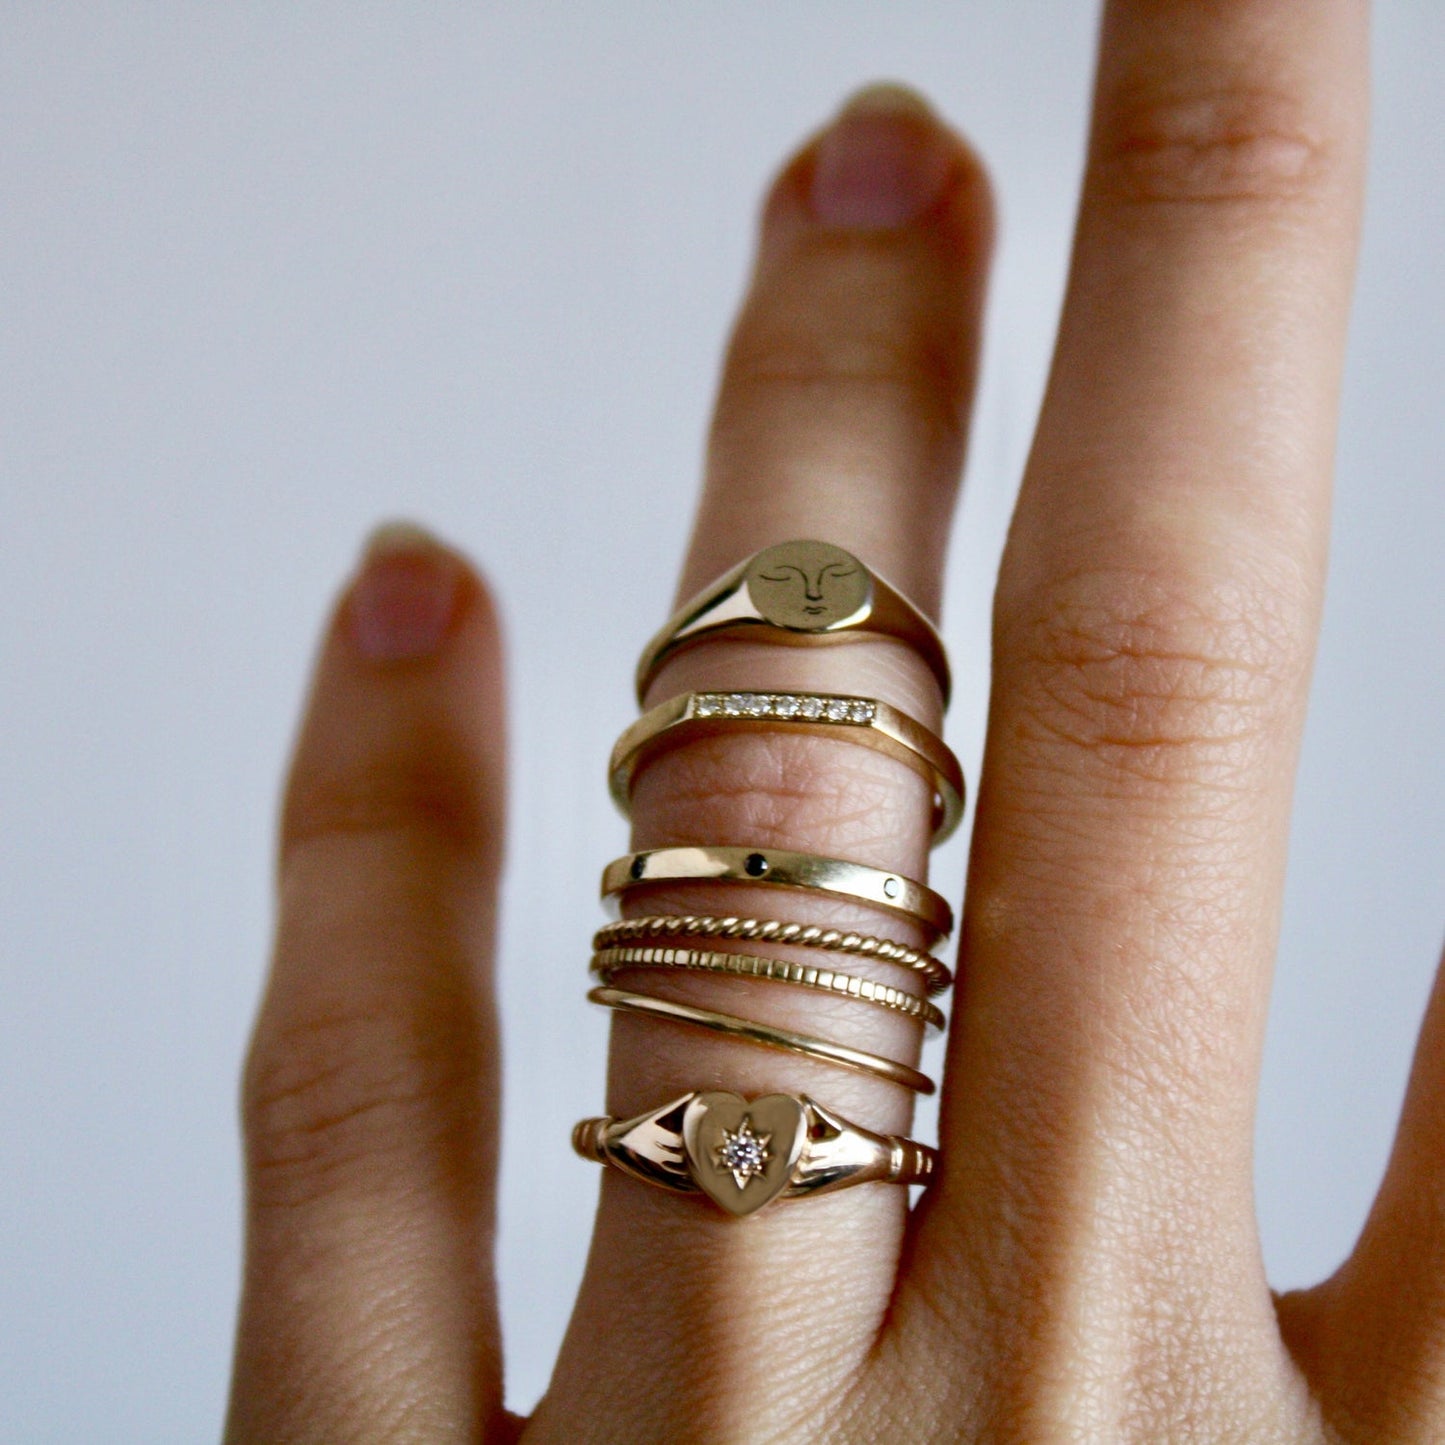 9ct yellow gold stacking rings from Jade Rabbit jewellery